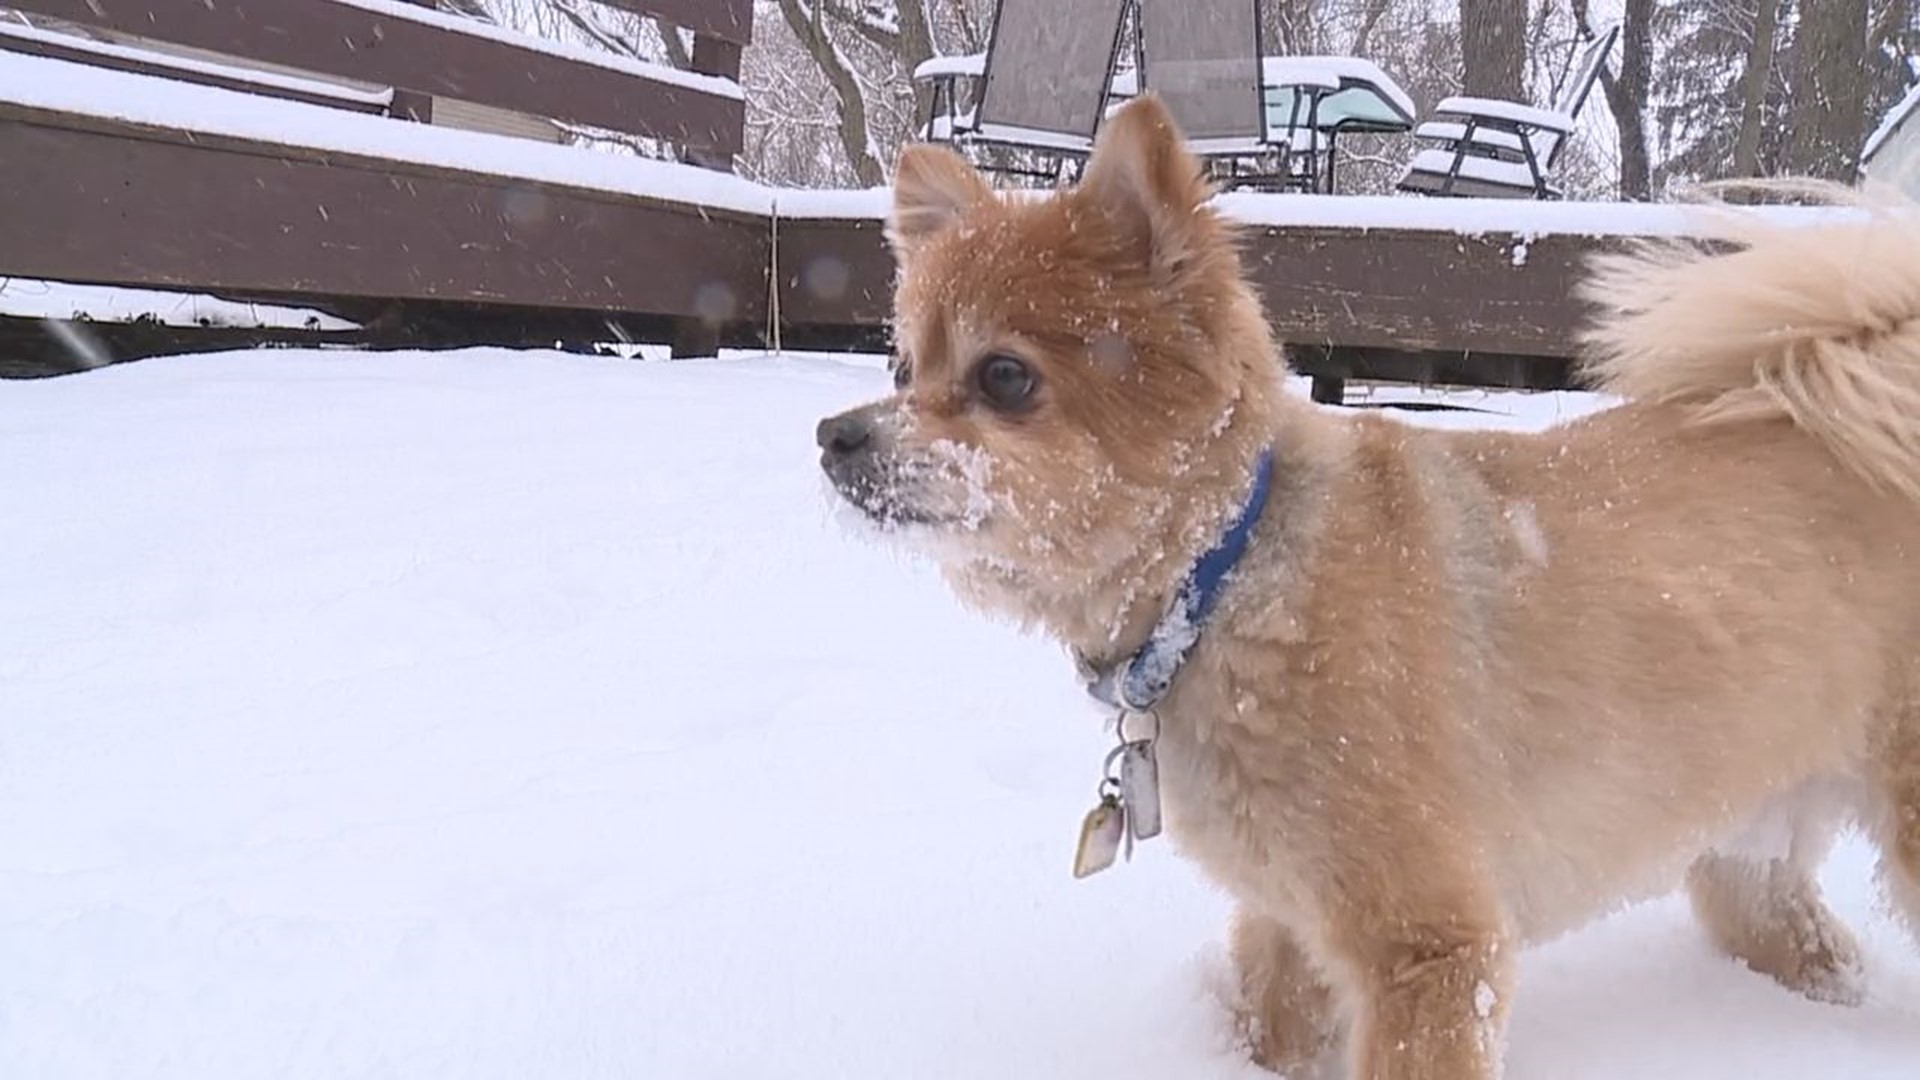 Vets say it's important to limit your time outdoors during cold weather to keep your pets safe and warm.